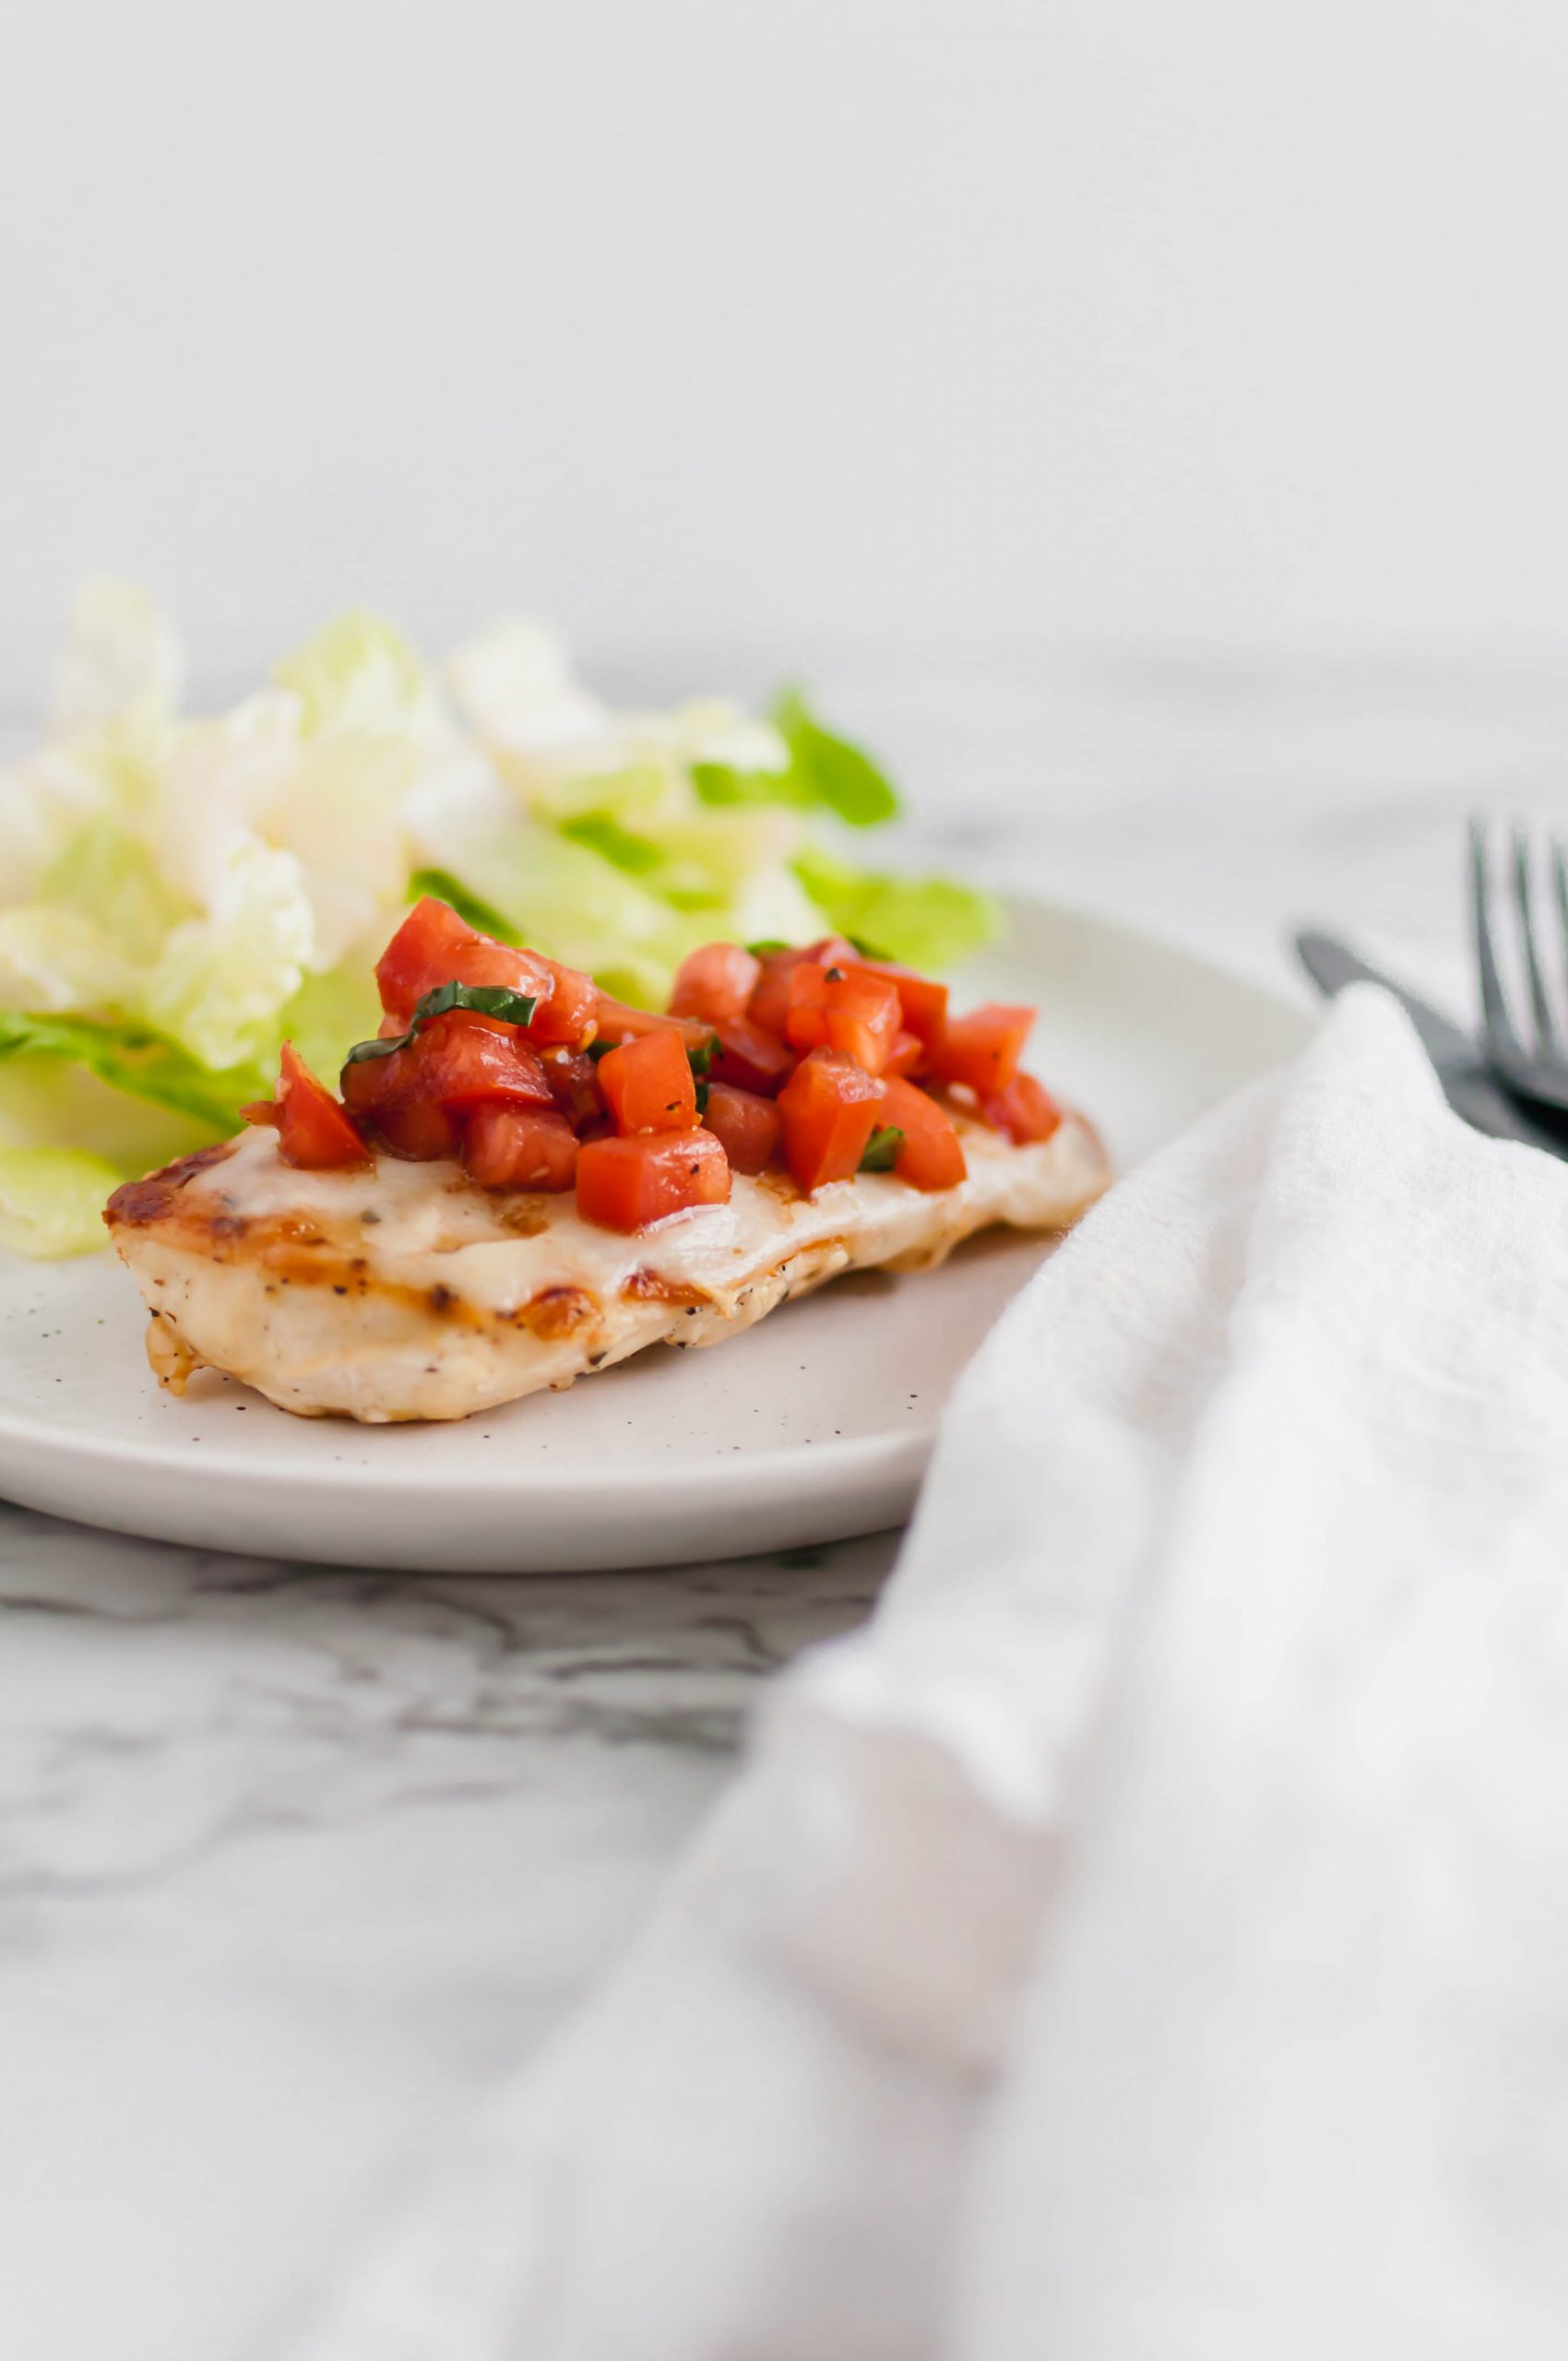 This Bruschetta Chicken comes together in less than 30 minutes for the perfect simple, healthy and fresh dinner. Perfectly seared chicken, lots of melted mozzarella and a super simple homemade bruschetta.